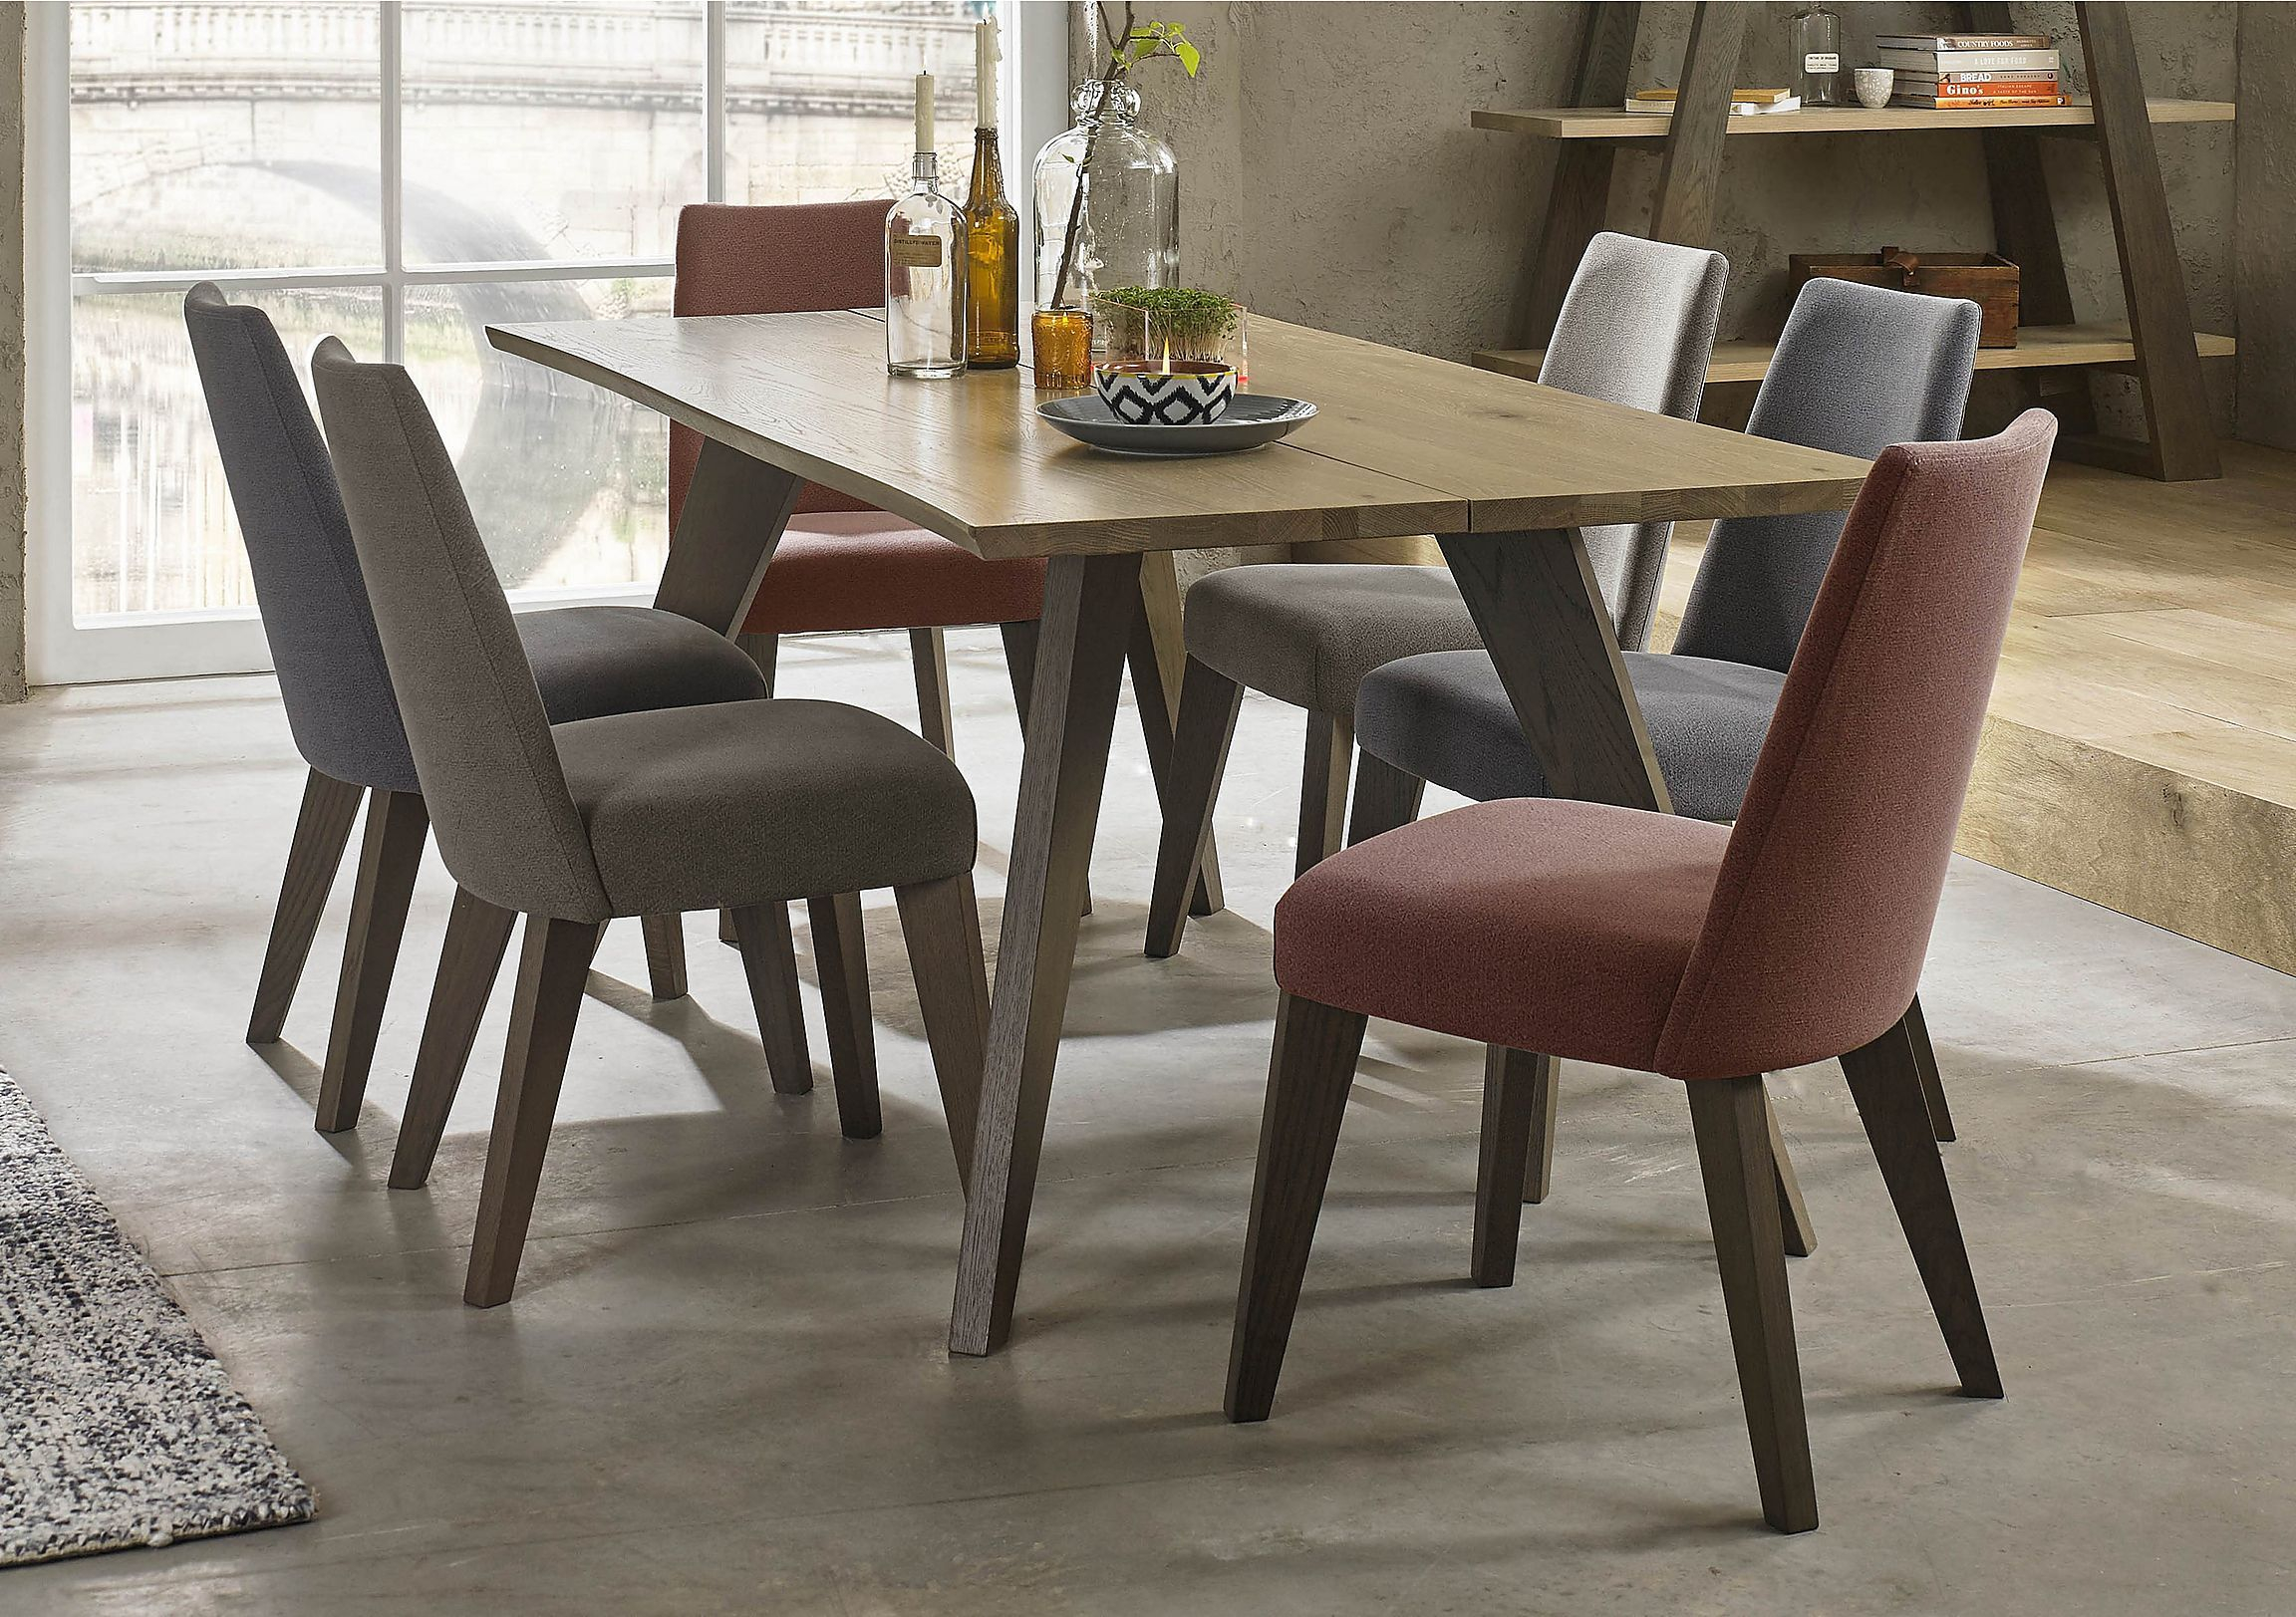 Cavendish Pair Of Dining Chairs Dinning Table Design inside dimensions 2304 X 1623